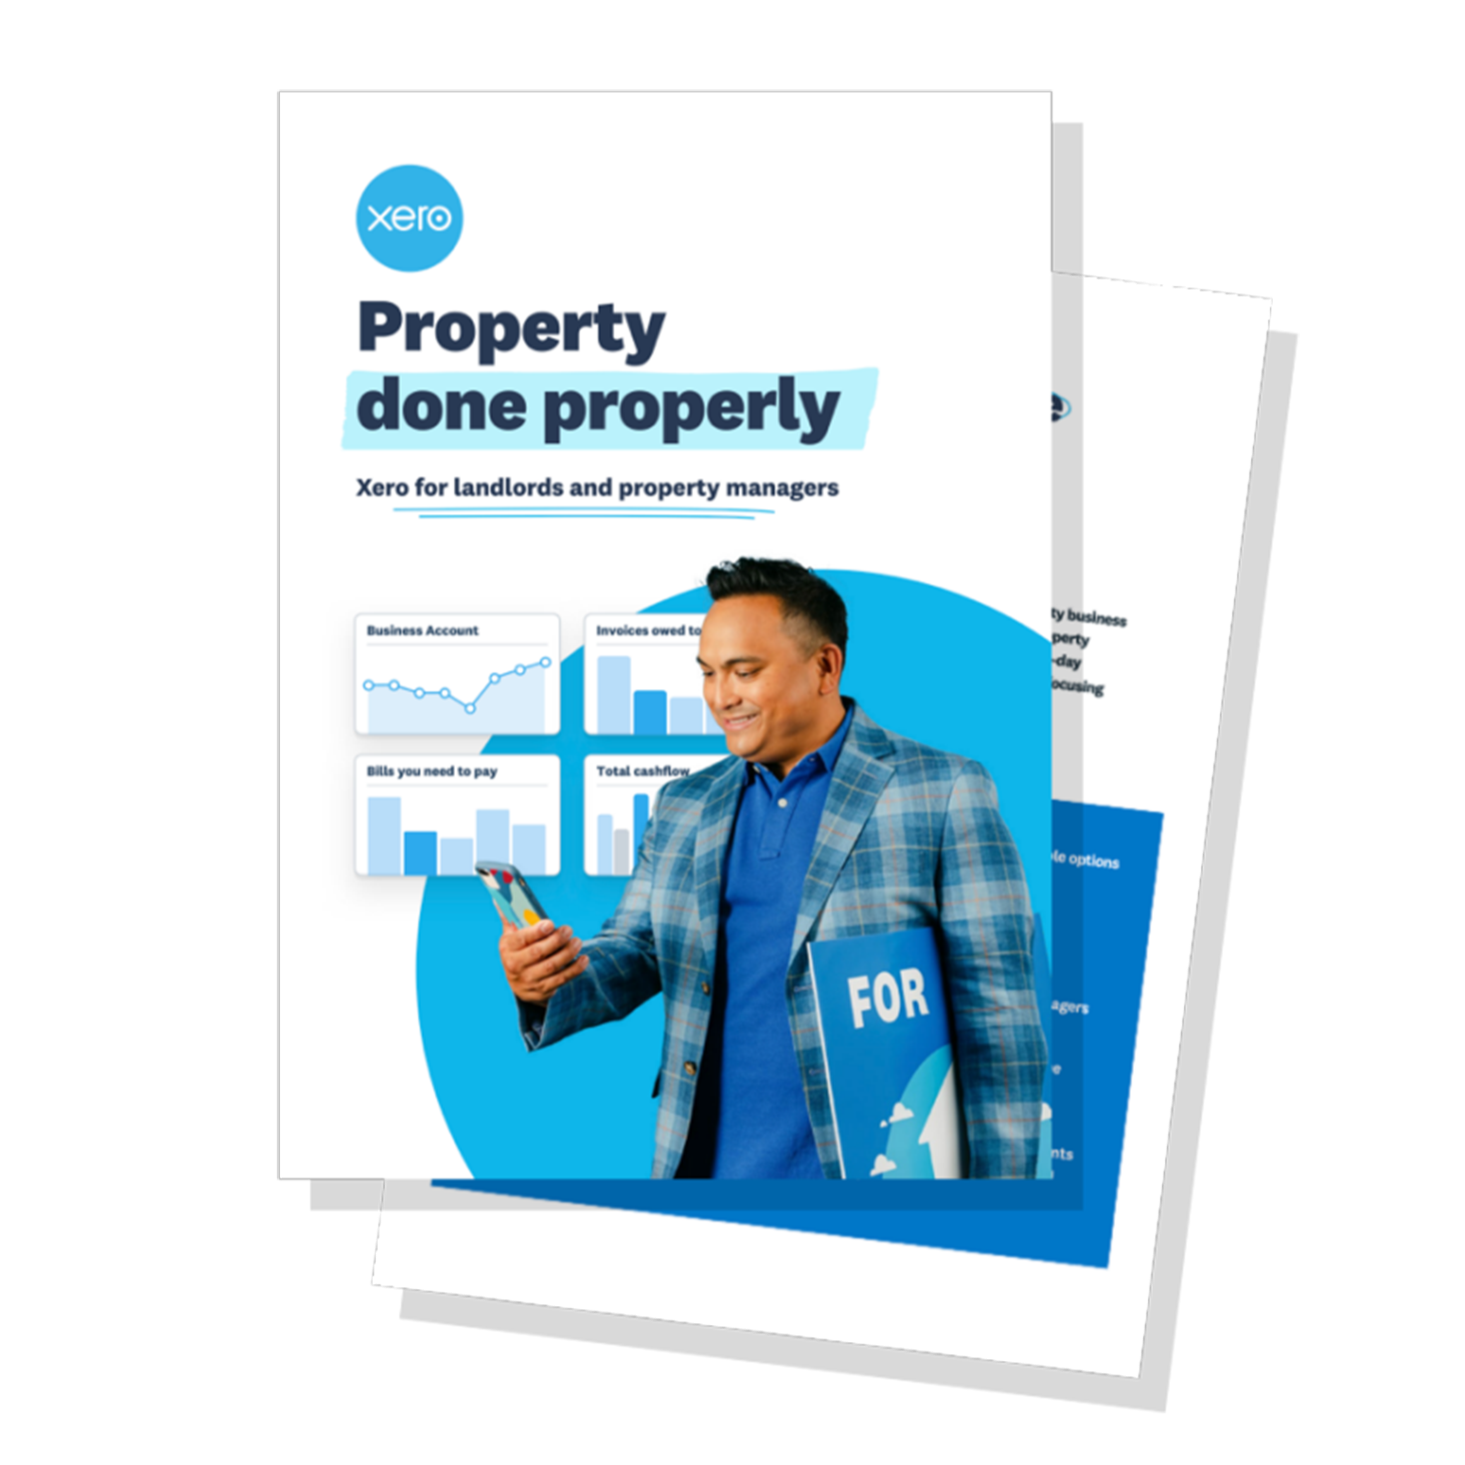 The cover of Xero’s digital brochure ‘Property done properly’ showing a property manager checking Xero on their mobile phone.